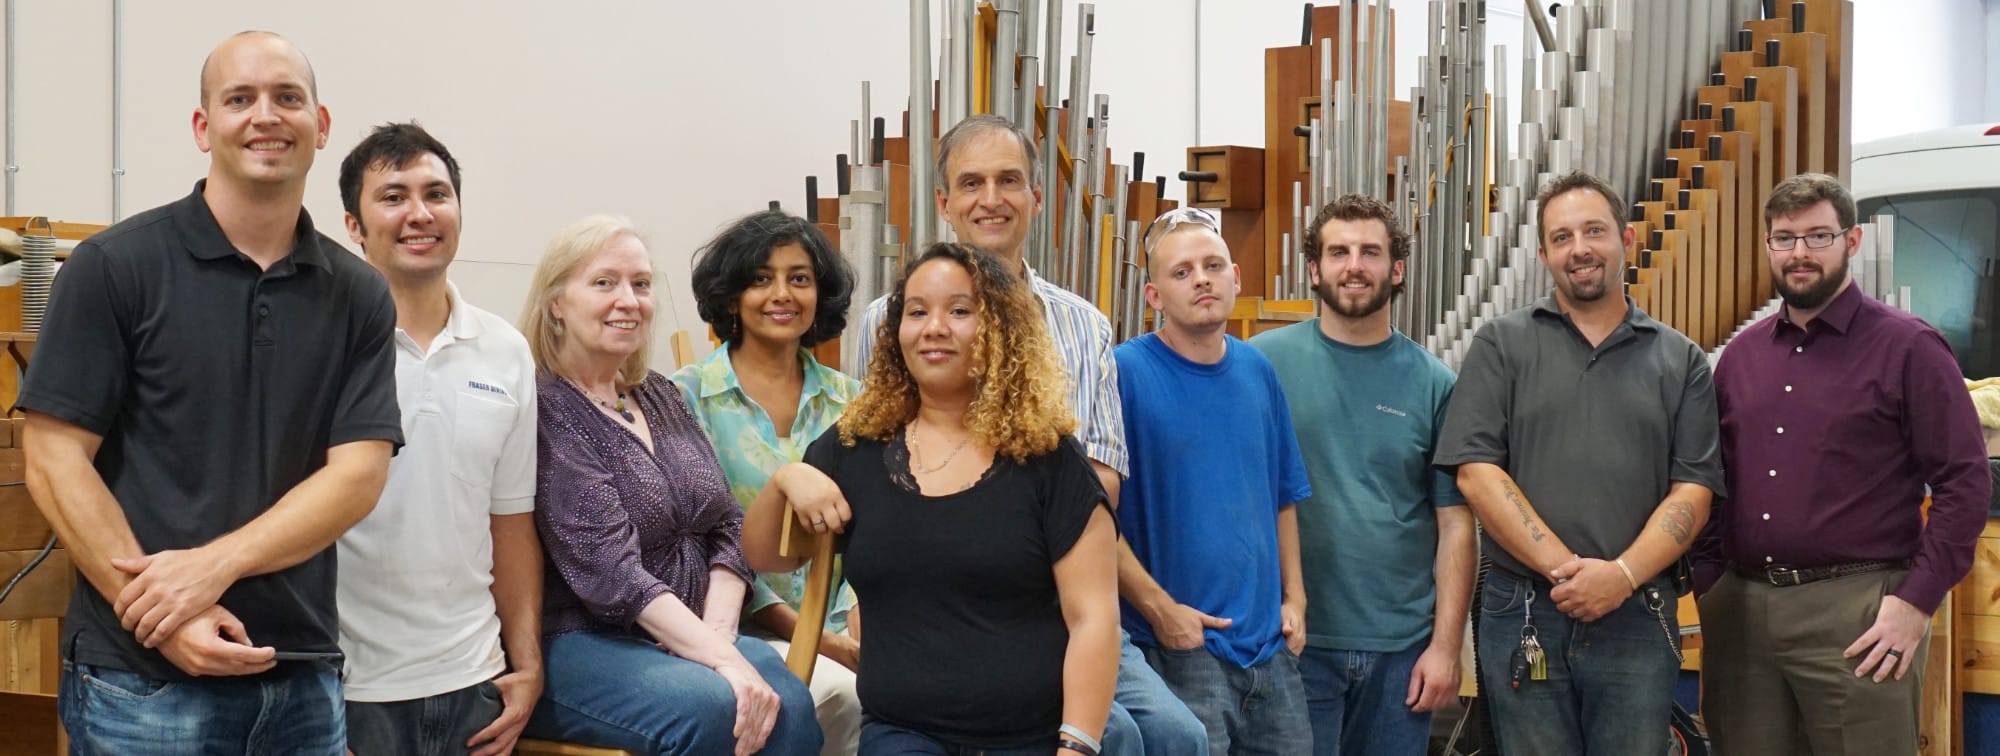 eek Pipe Organ Company Staff with backdrop of Schantz Pipe Organ, located at workshop in Berea, OH